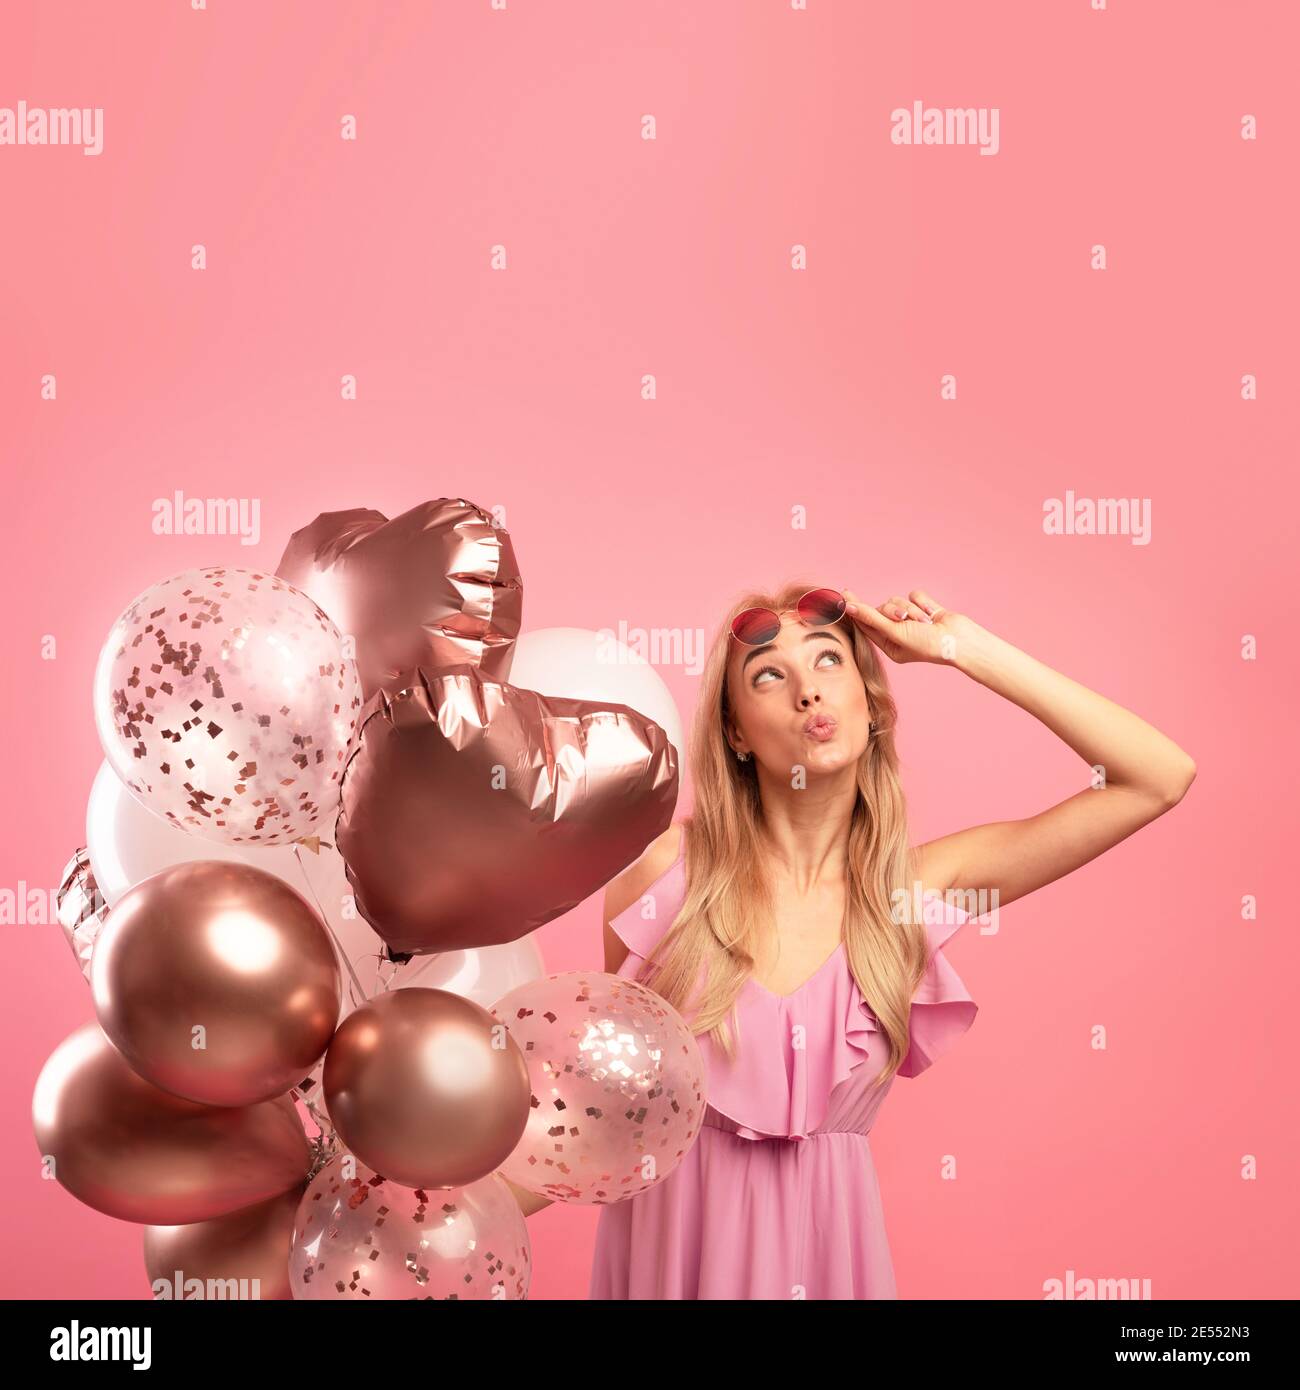 Holiday sale concept. Cute blonde woman holding bunch of balloons, pursing her lips and looking upwards at copy space Stock Photo